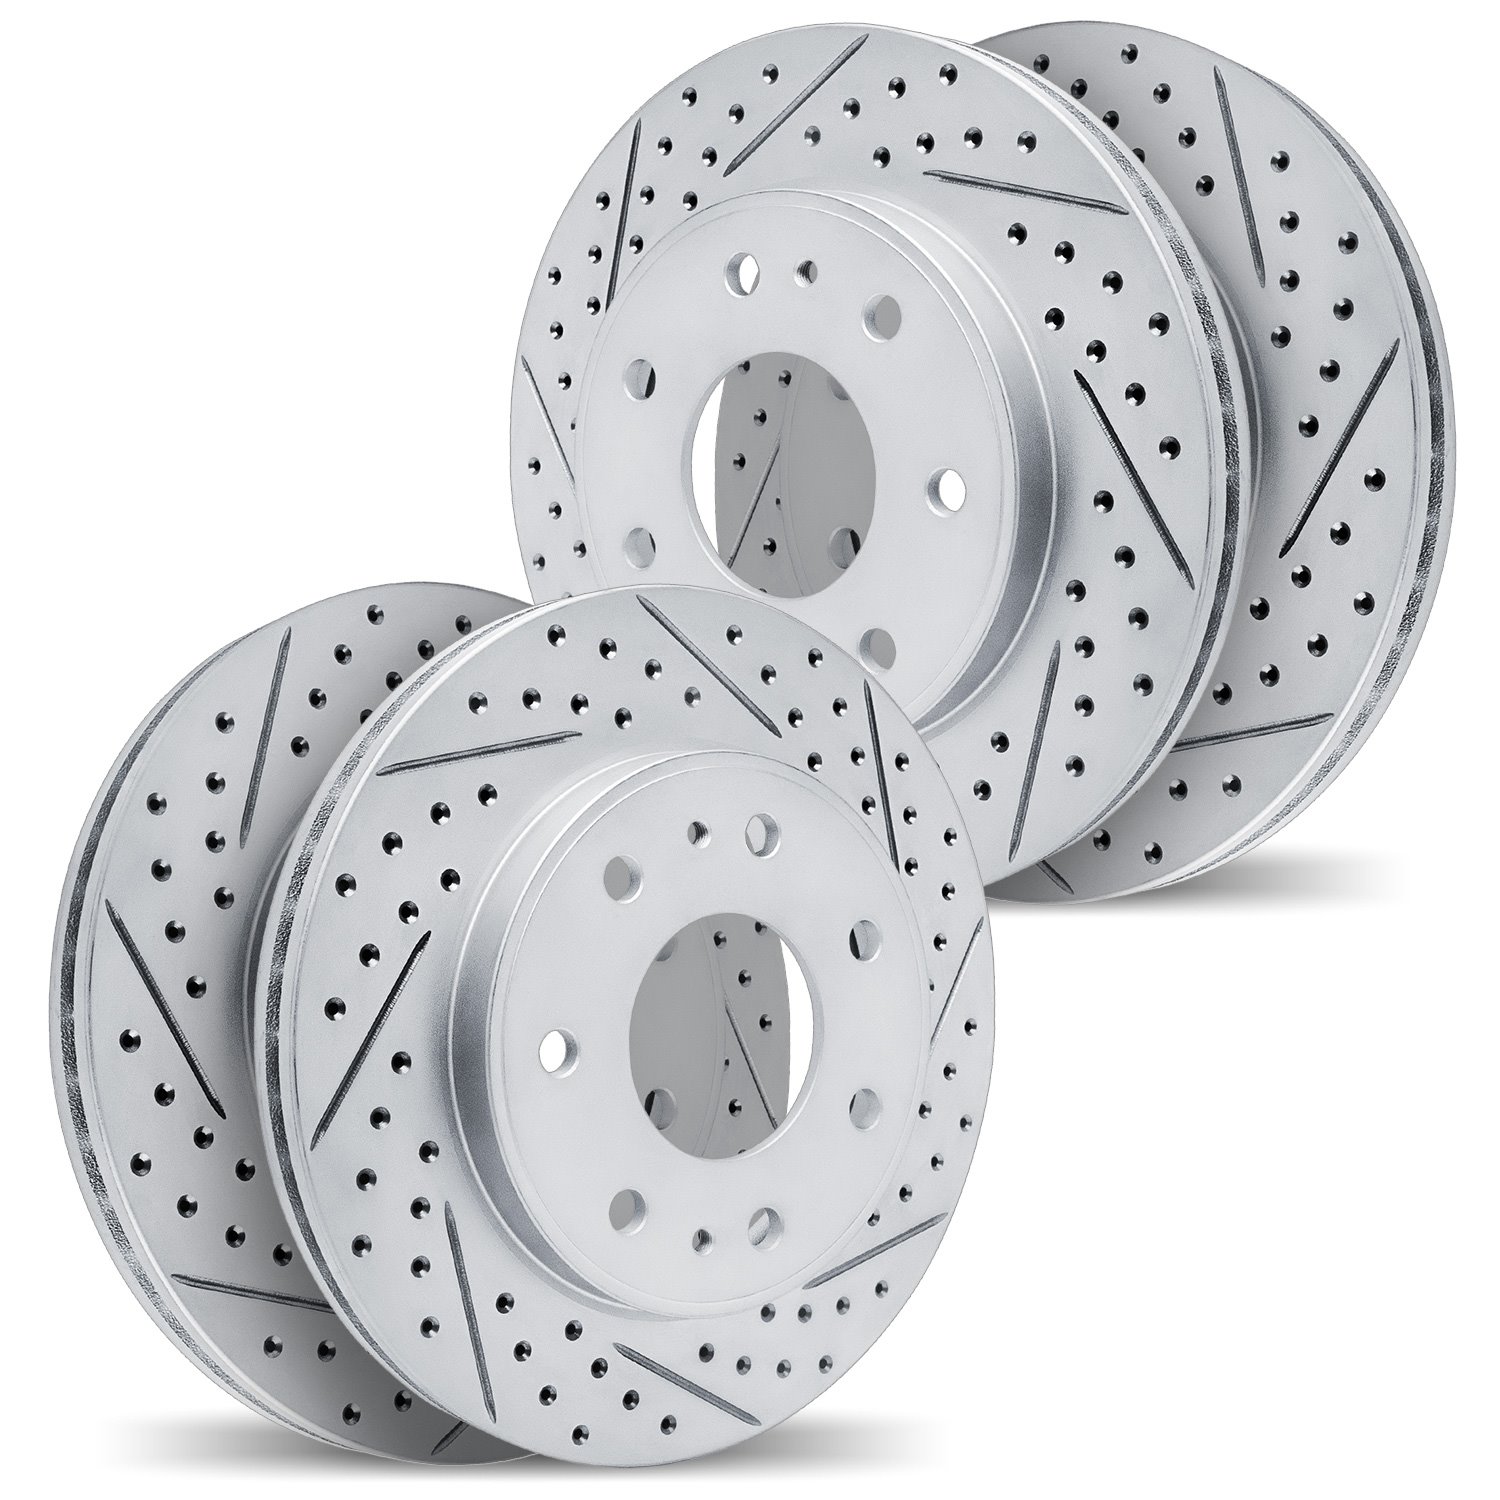 2004-54088 Geoperformance Drilled/Slotted Brake Rotors, 2009-2009 Ford/Lincoln/Mercury/Mazda, Position: Front and Rear